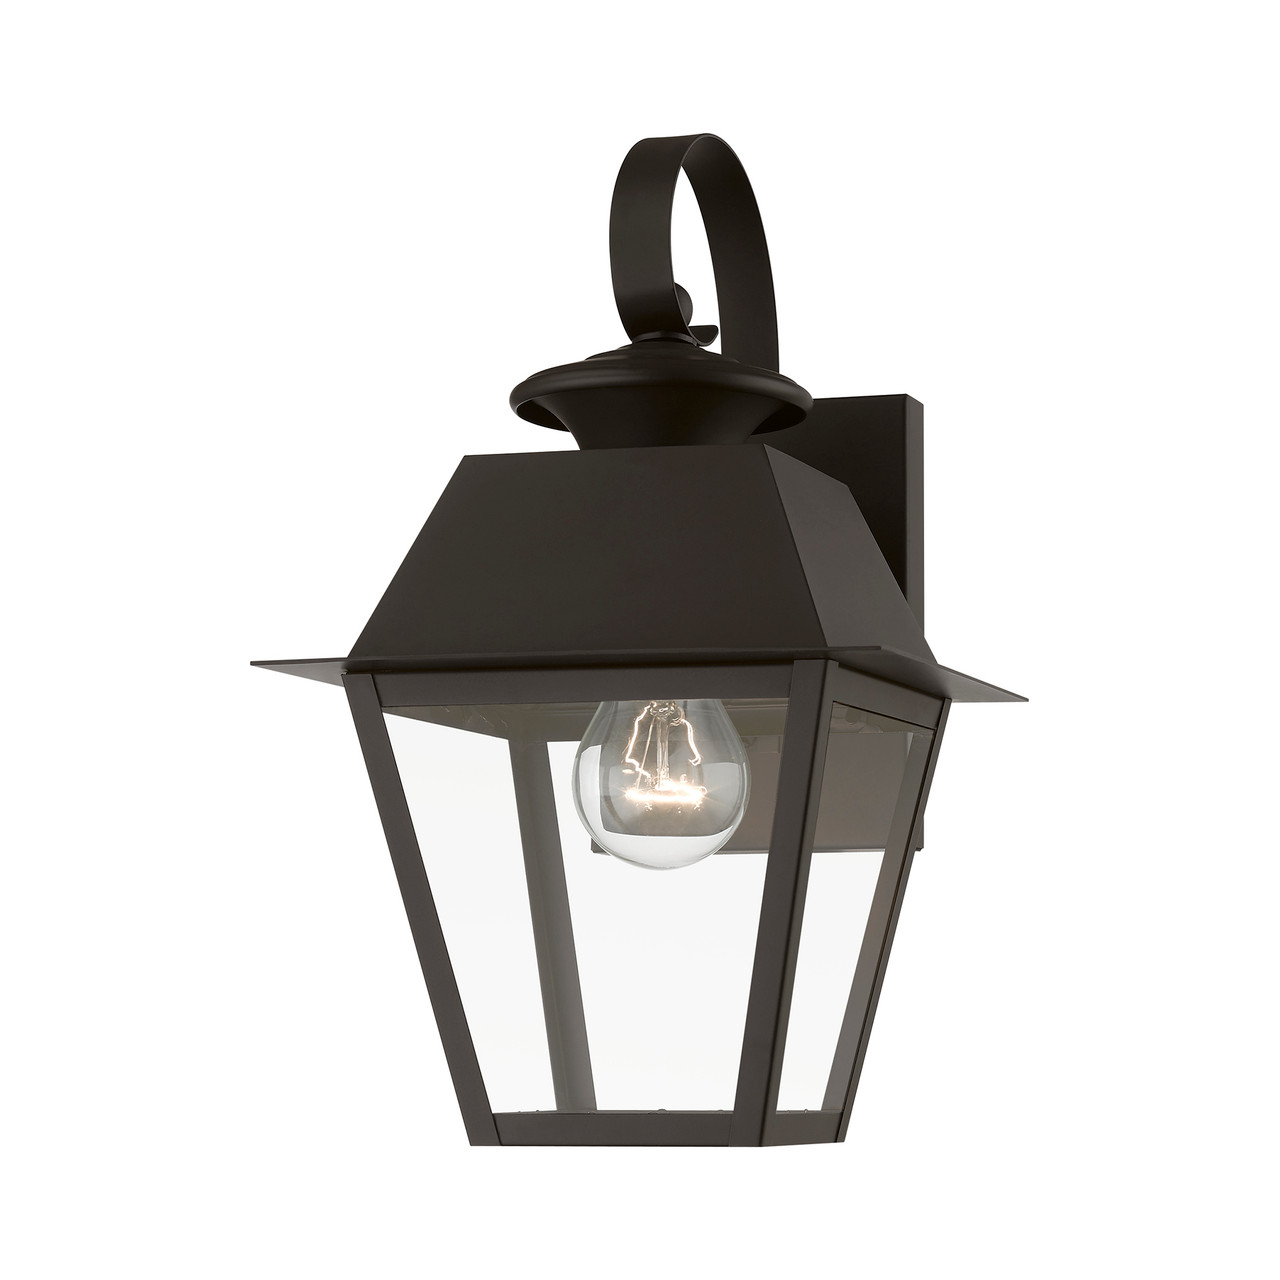 LIVEX LIGHTING 27212-07 1 Light Bronze with Antique Brass Finish Cluster Outdoor Small Wall Lantern